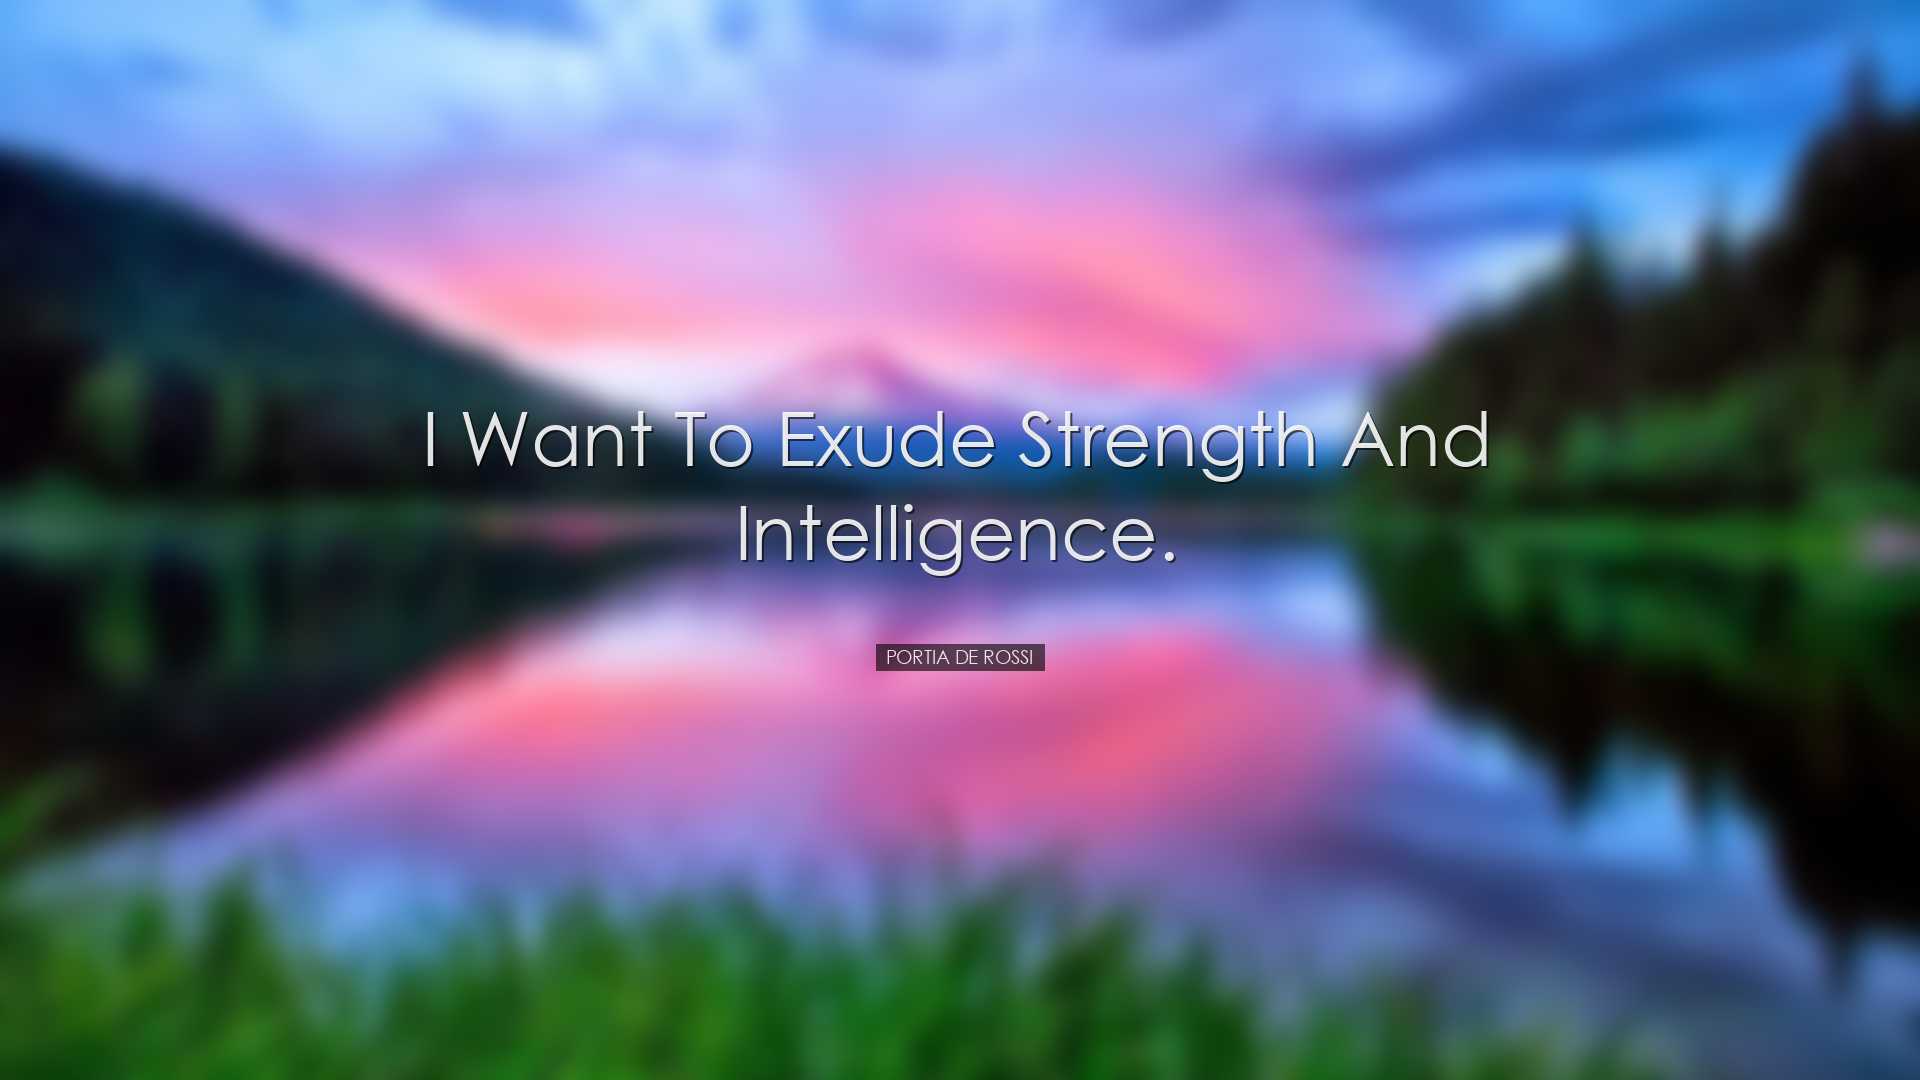 I want to exude strength and intelligence. - Portia de Rossi